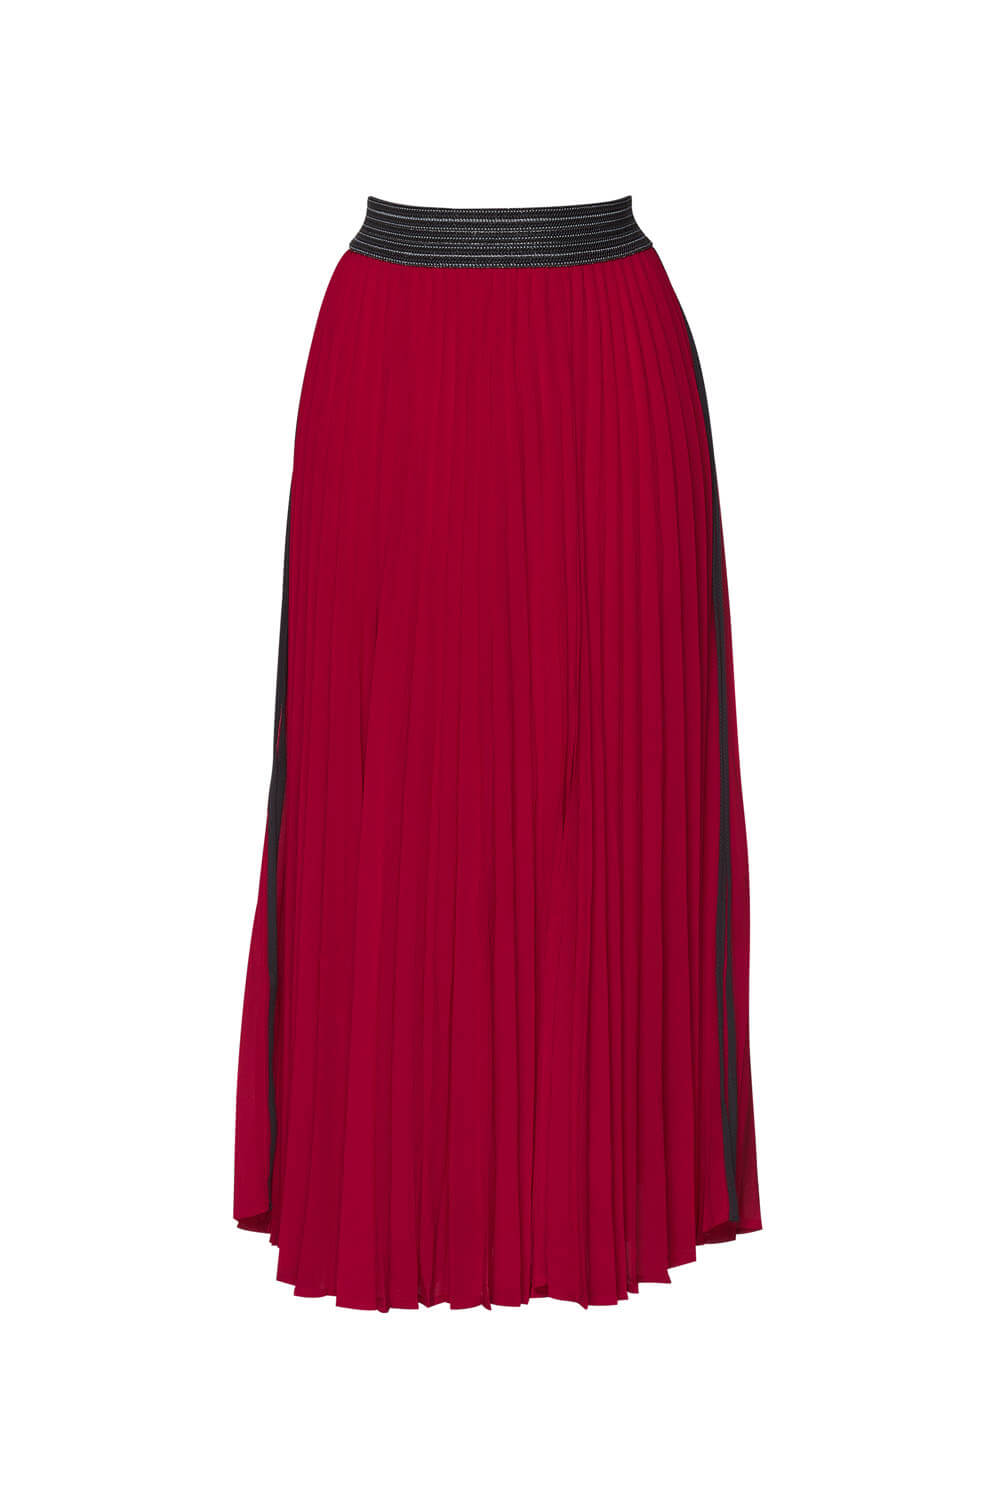 Just Pleat It Skirt - Red/Taupe